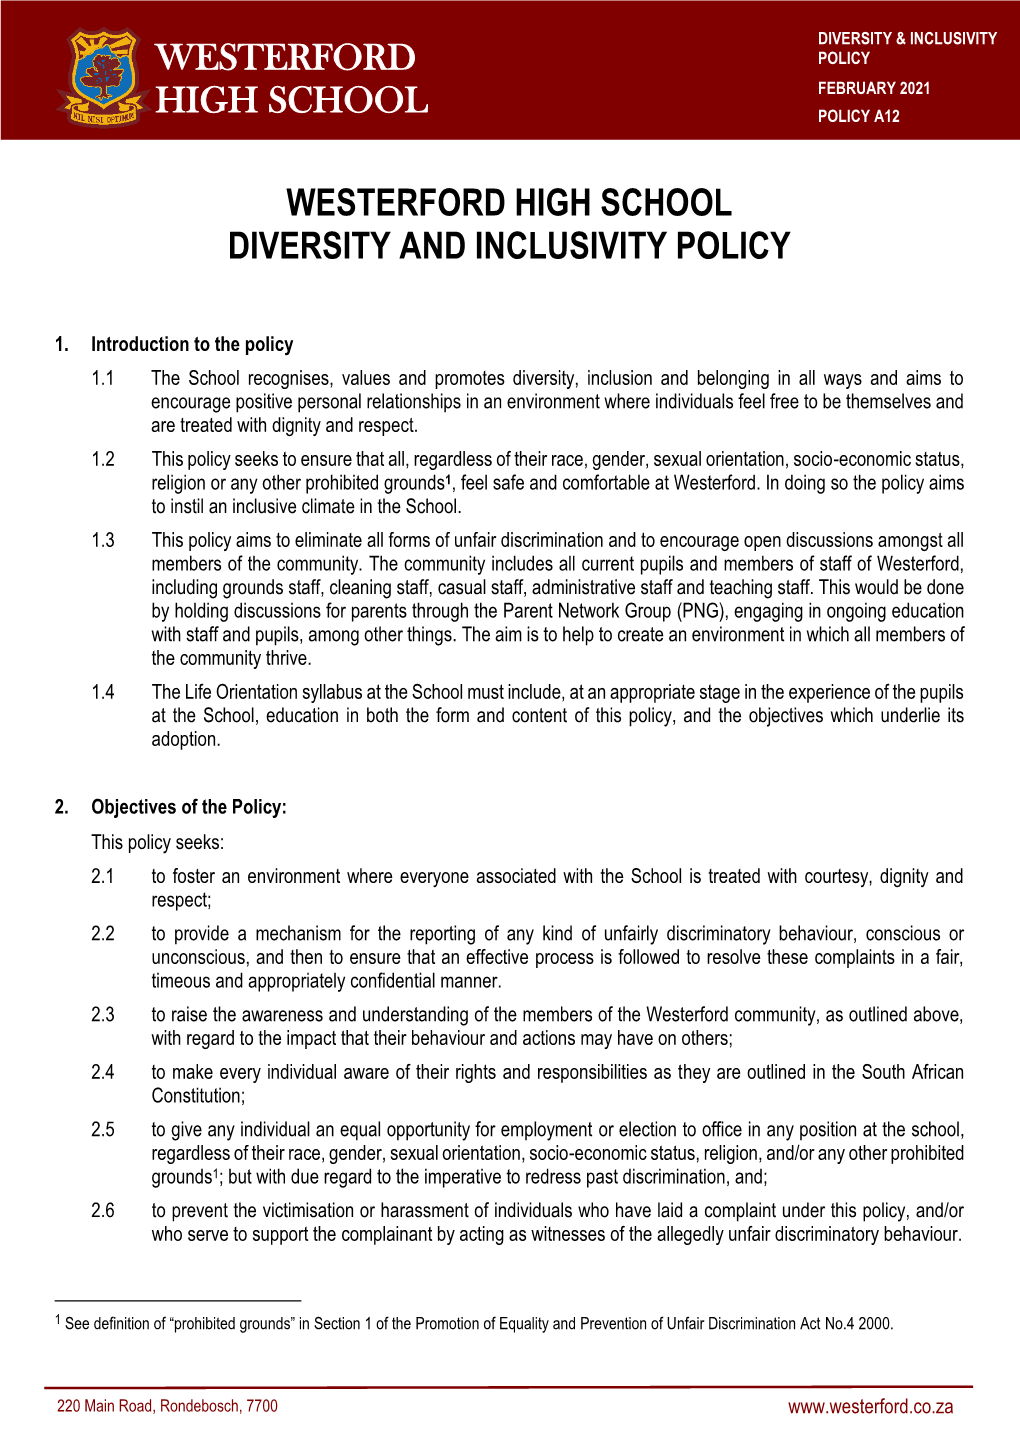 Westerford High School Diversity and Inclusivity Policy